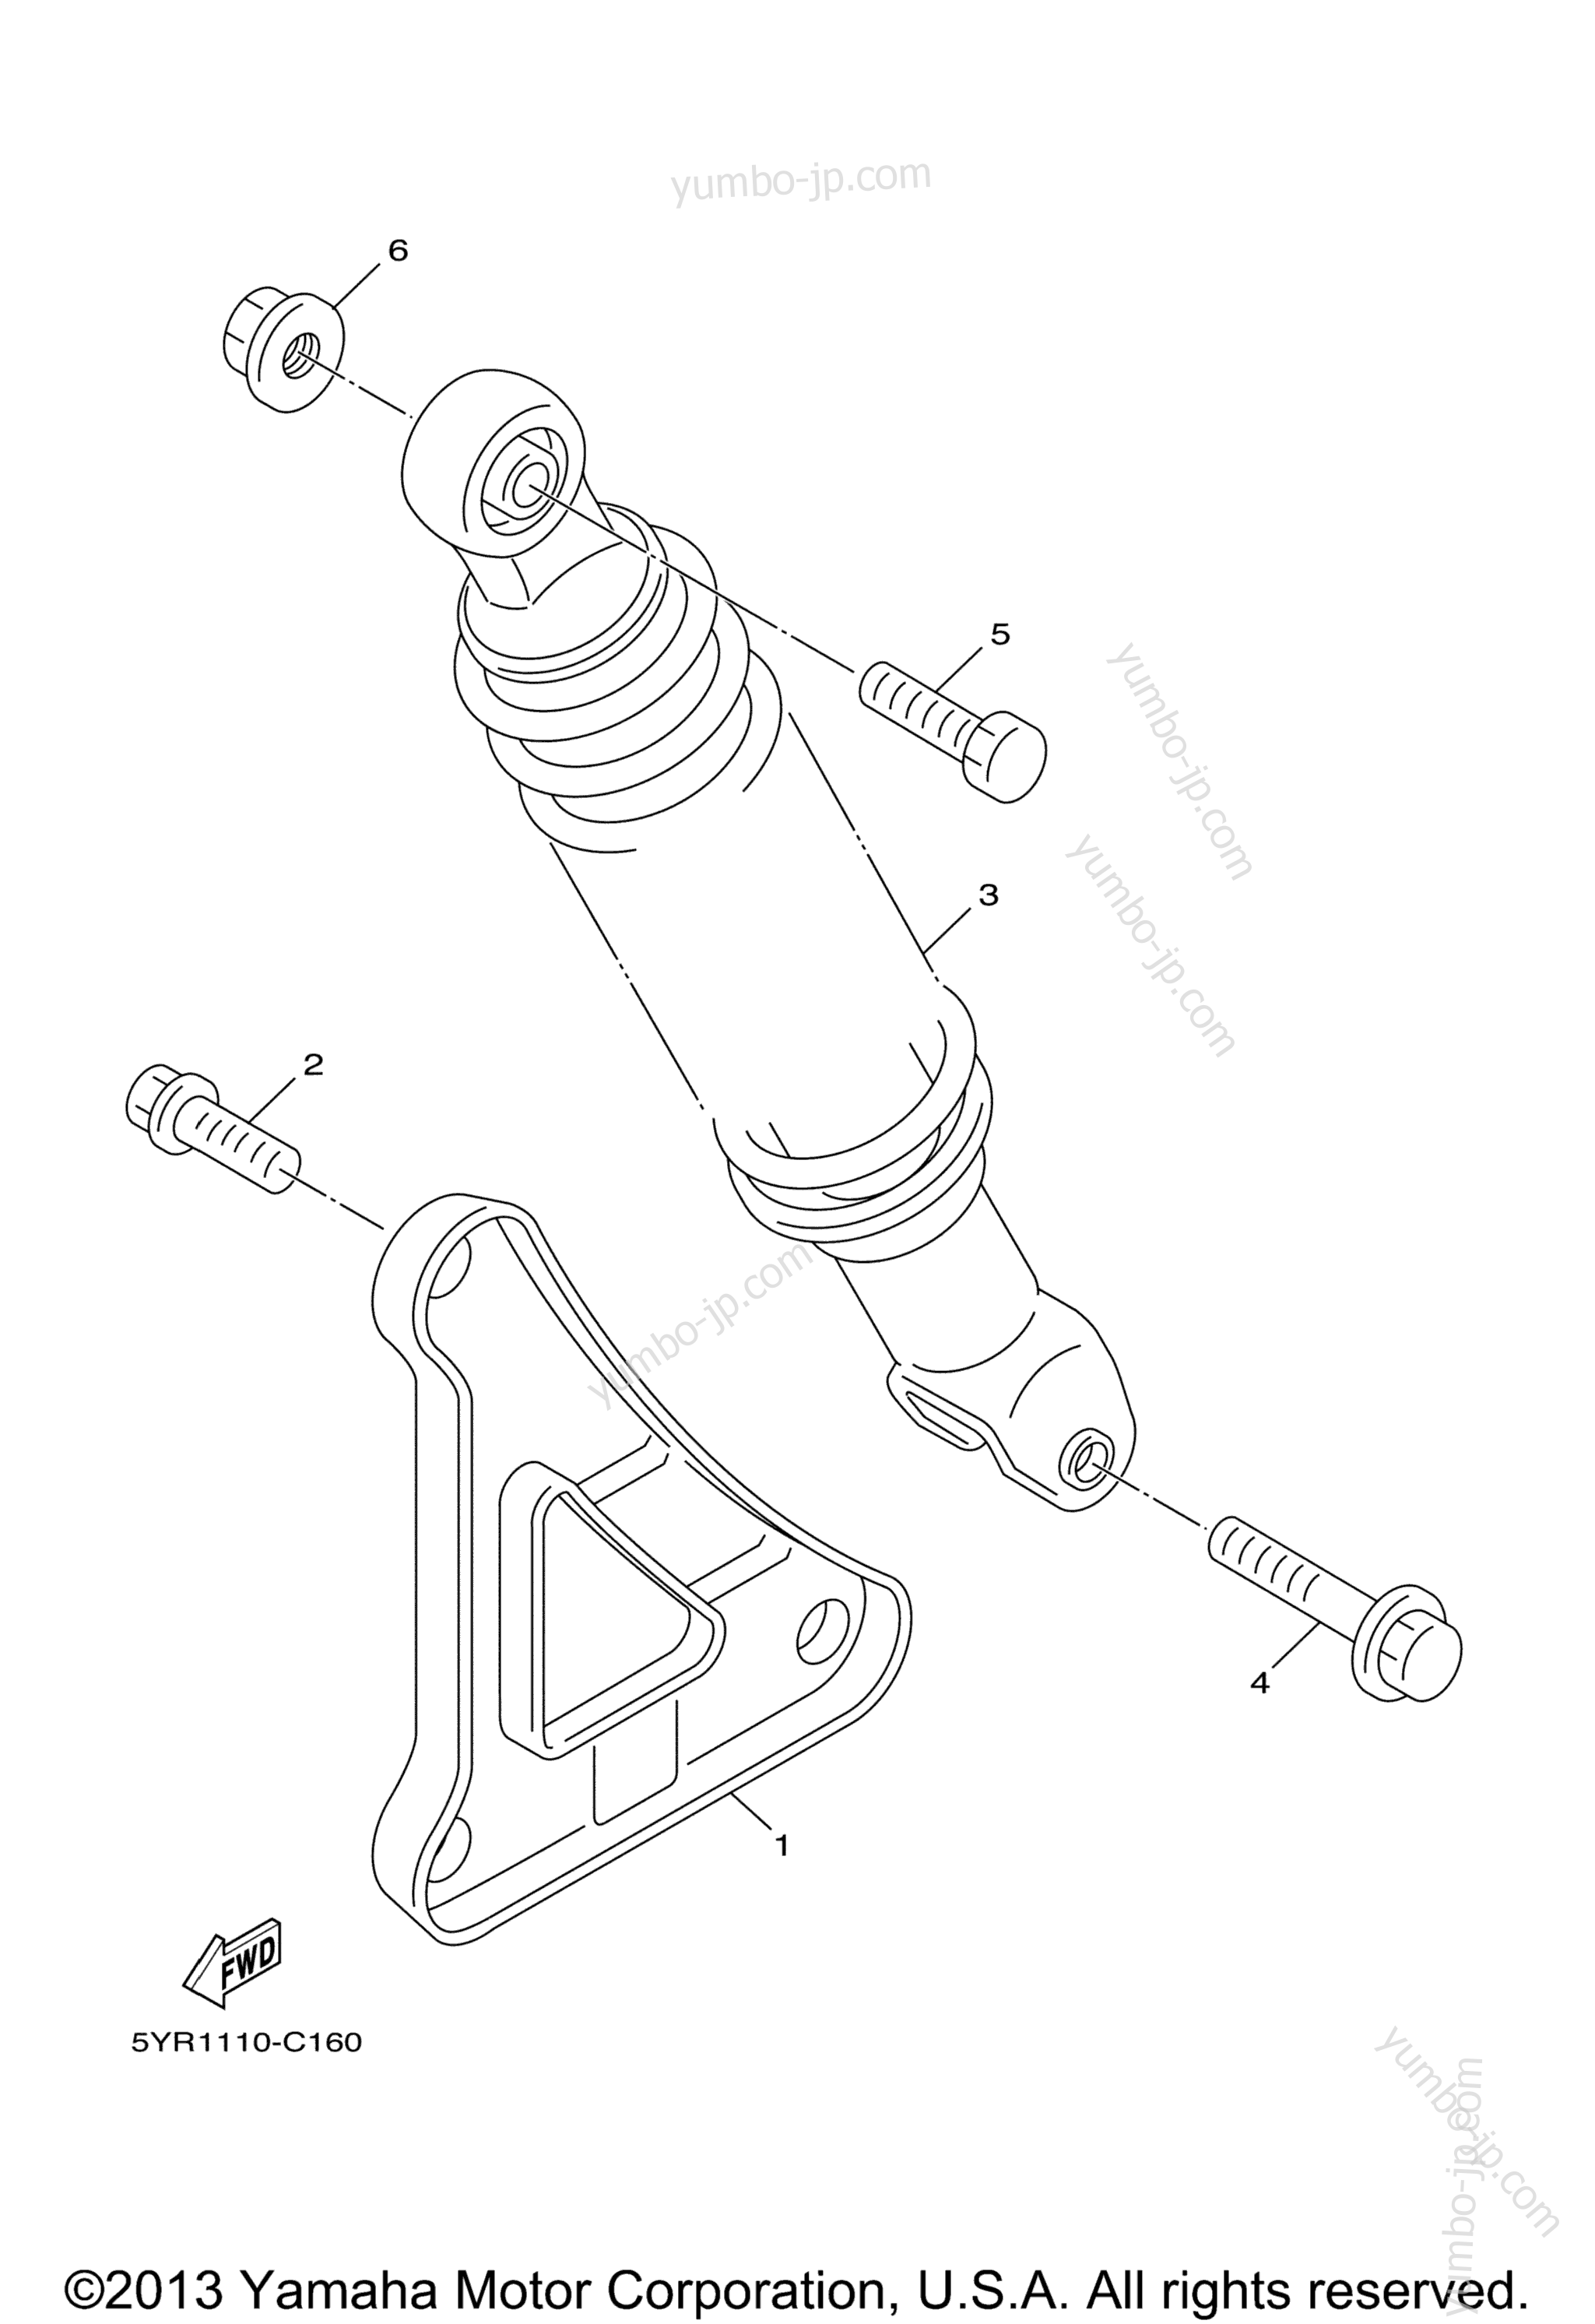 Rear Arm Suspension for scooters YAMAHA VINO 125 (YJ125T) 2005 year